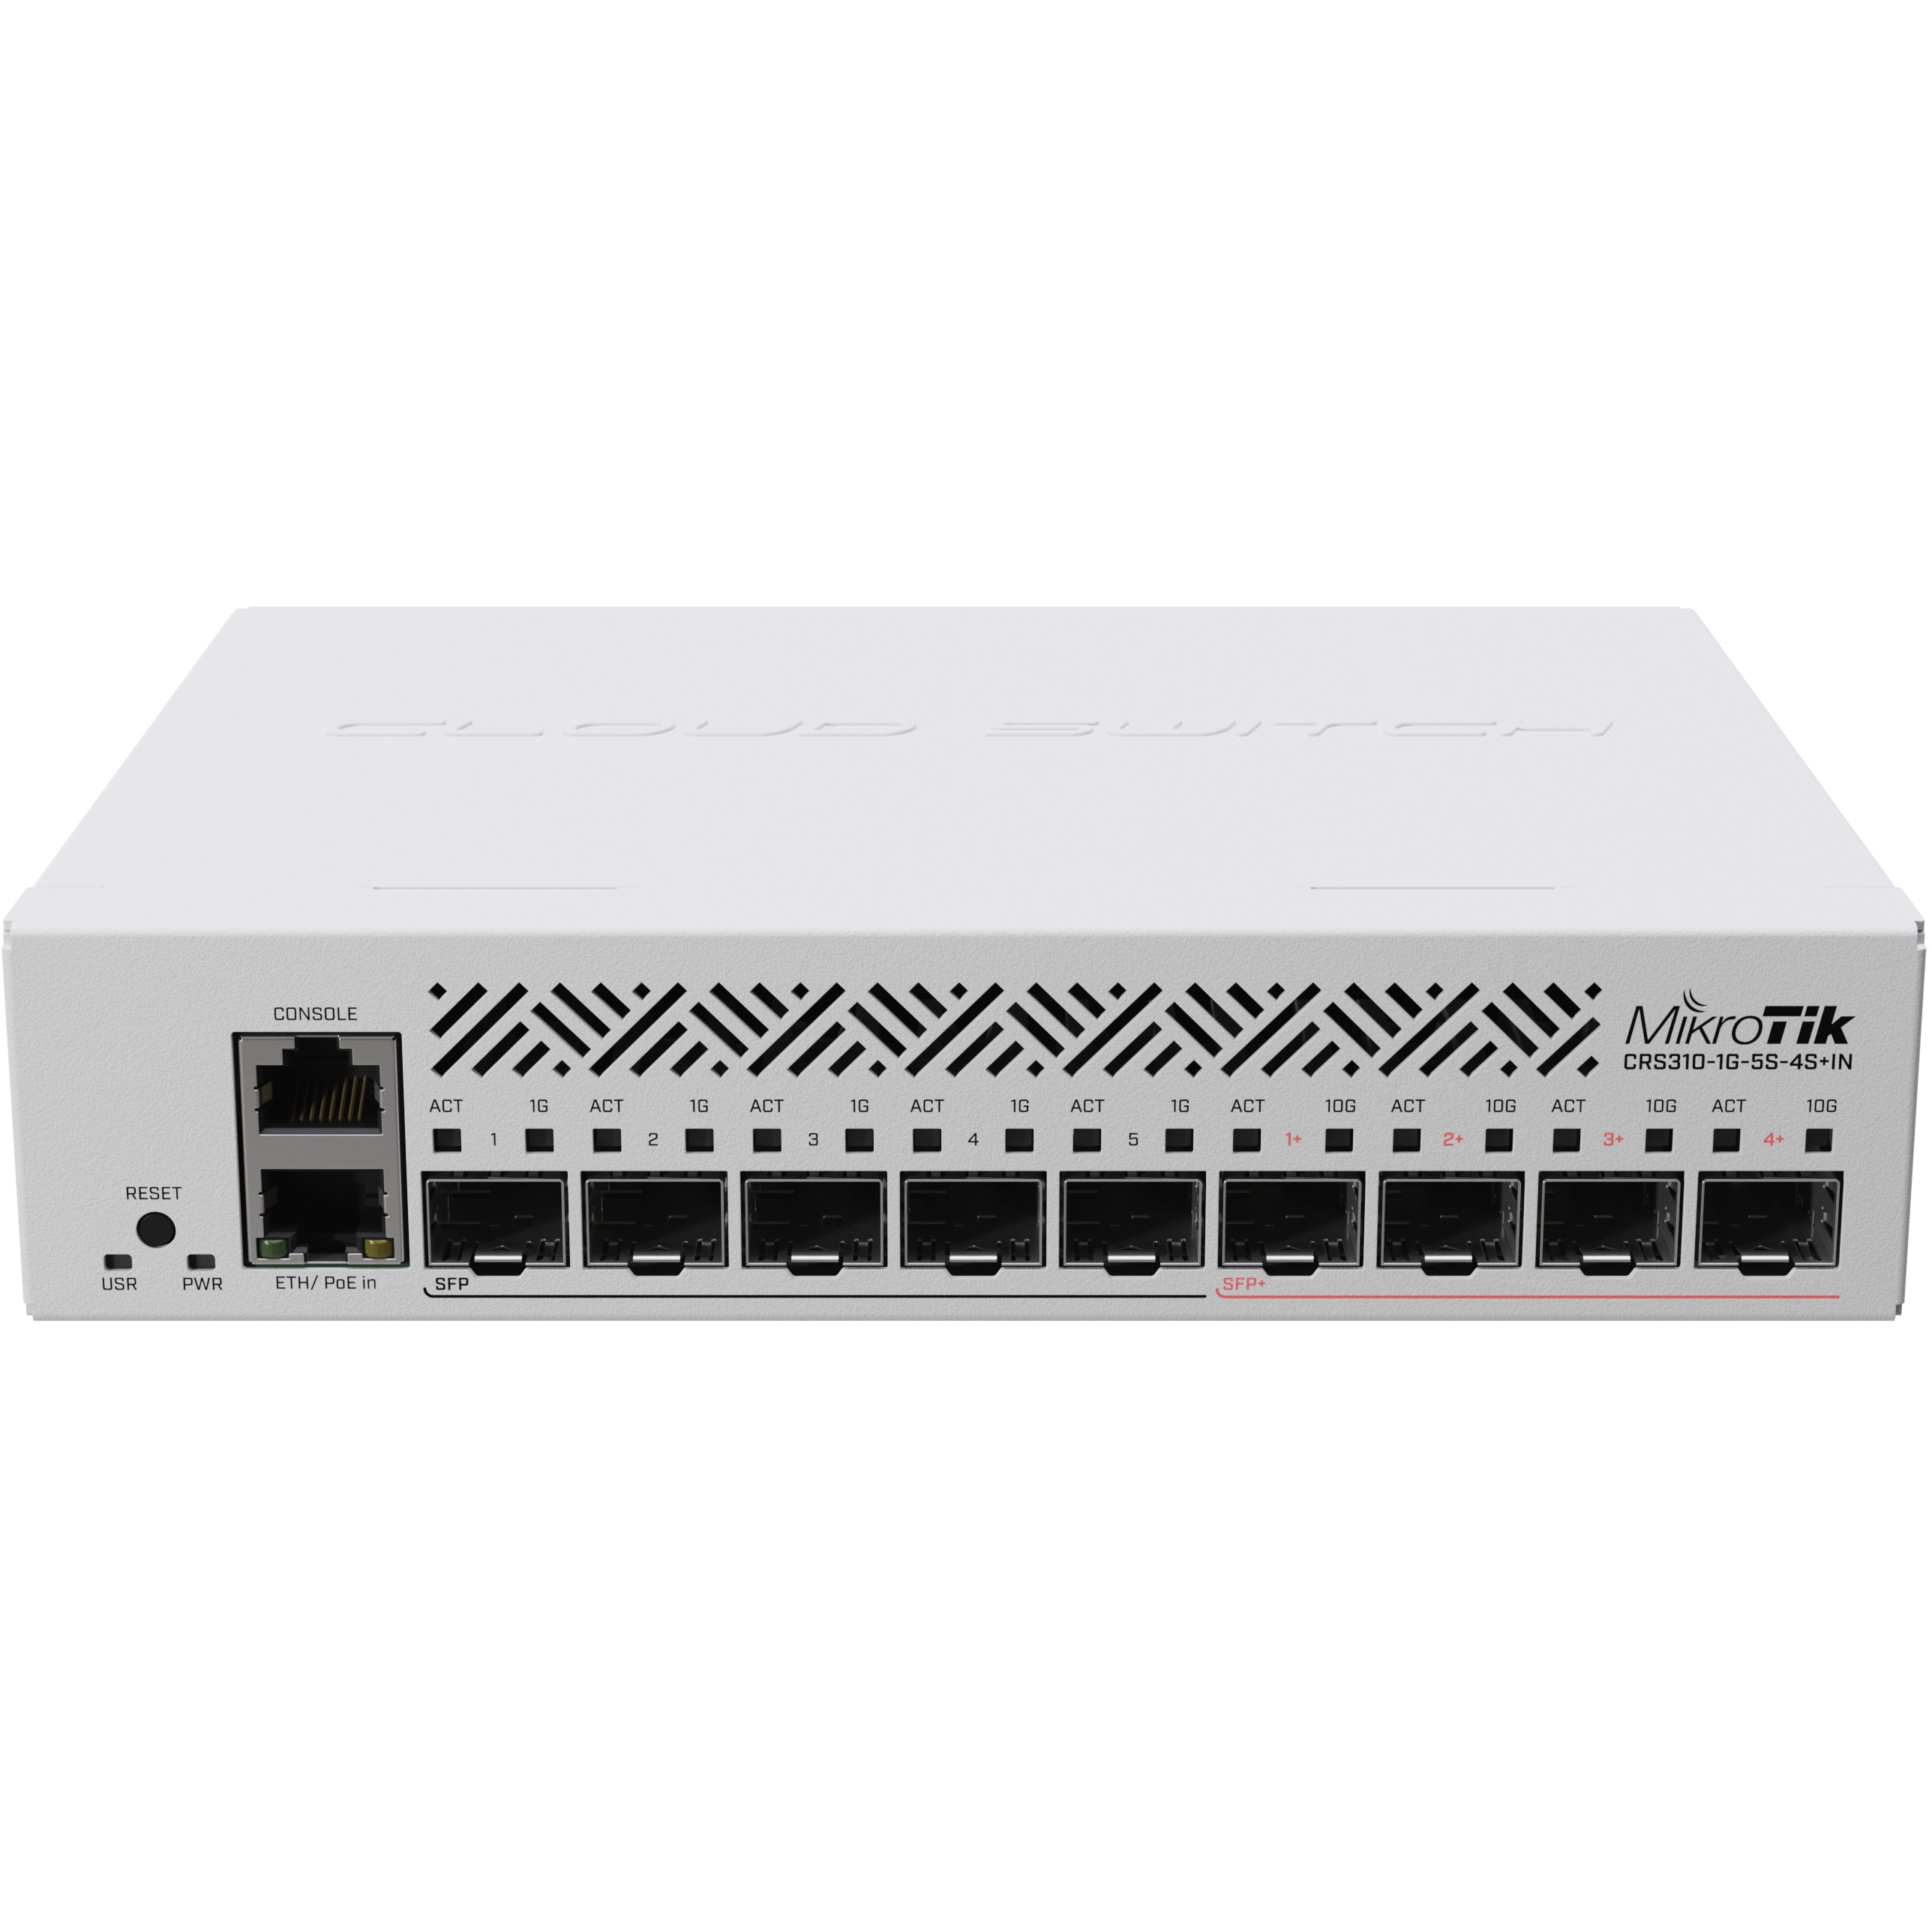 MIKROTIK Mikrotik CRS310-1G-5S-4S+IN network switch Hubs Router 2 Switching Netzwerk